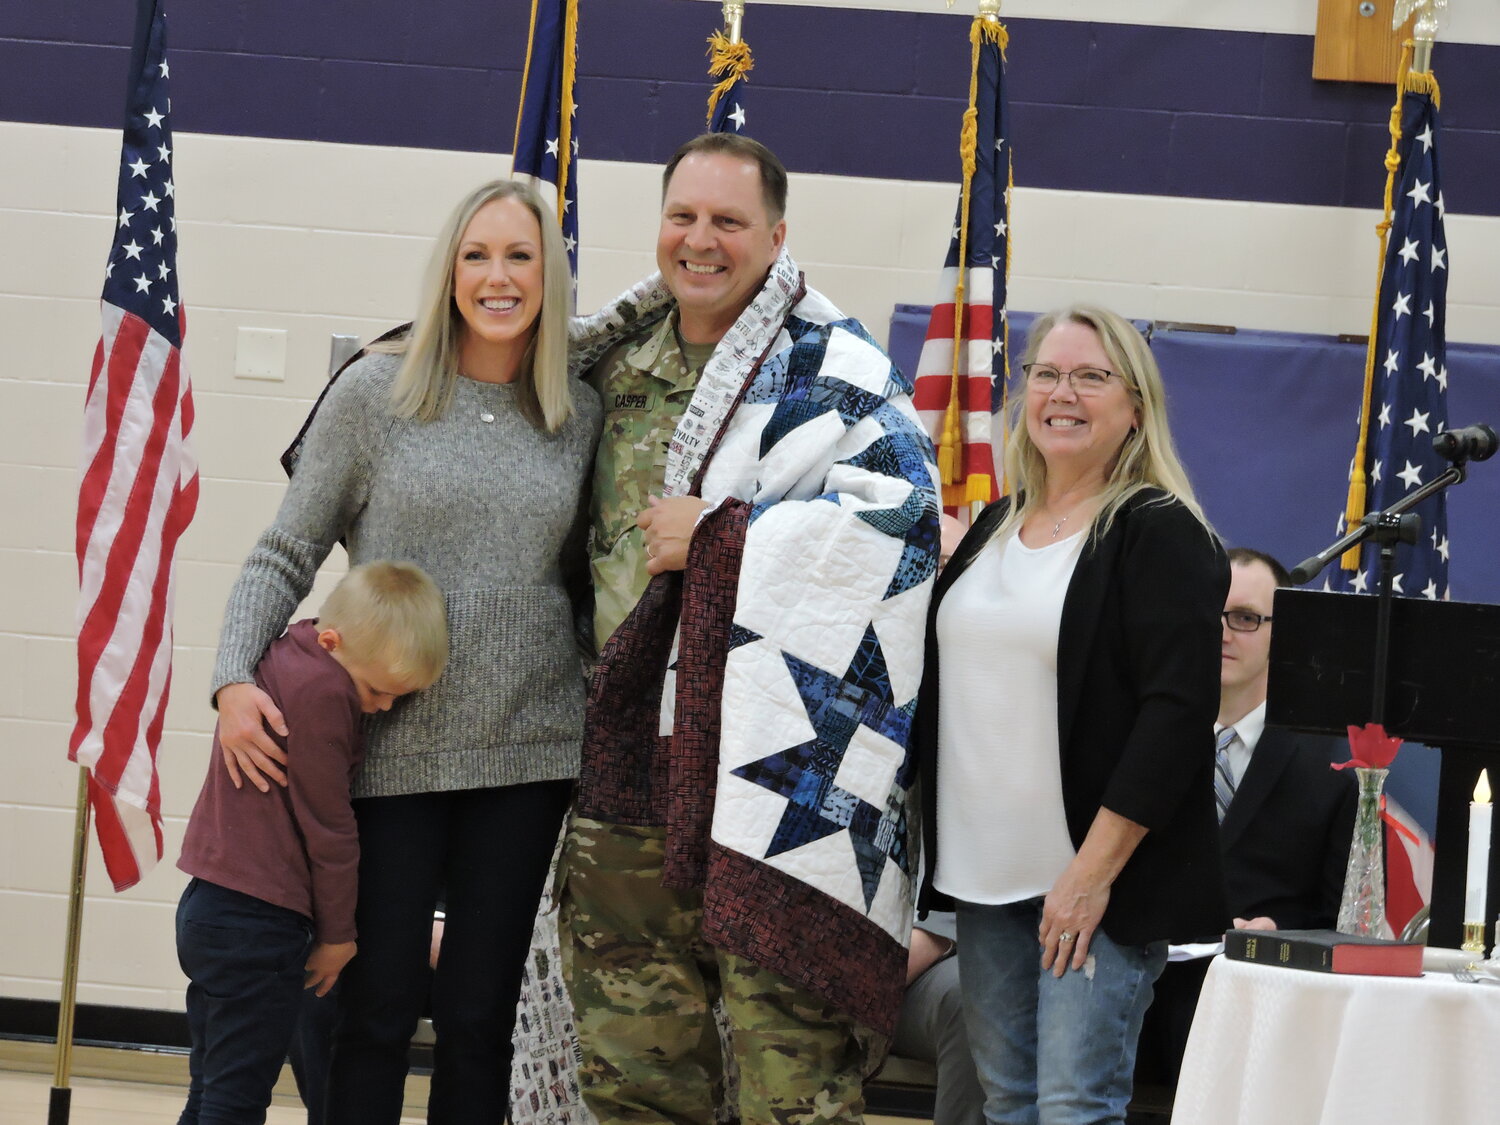 Lt. Col. Ryan Casper, wife Melinda Casper, and their son Raleigh wrapped in the Quilt of Valor, made and presented by Laura Cutsforth.